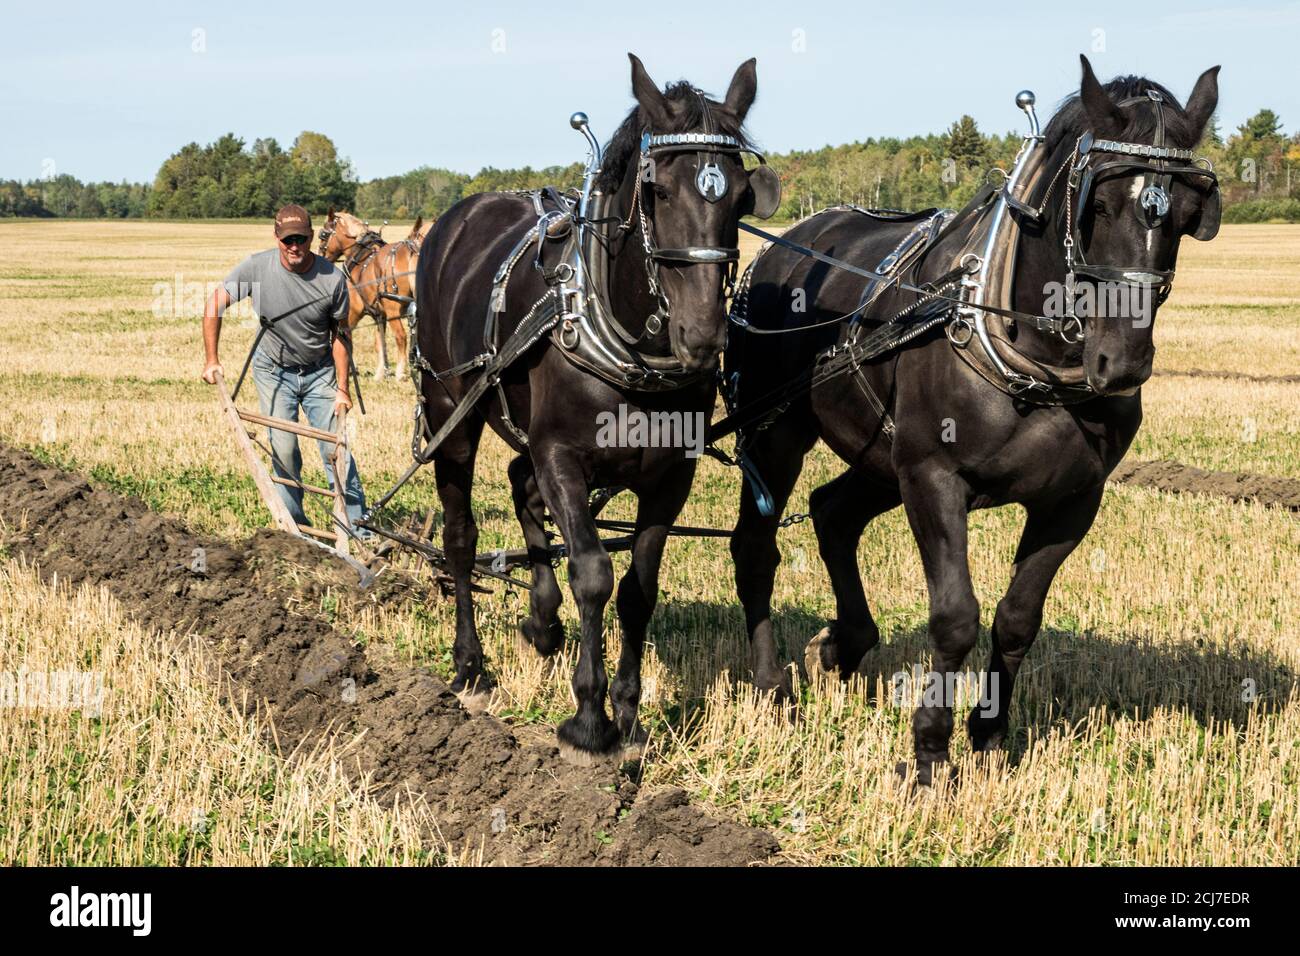 International Plowing Match competition, horse plowing, Verner, Ontario